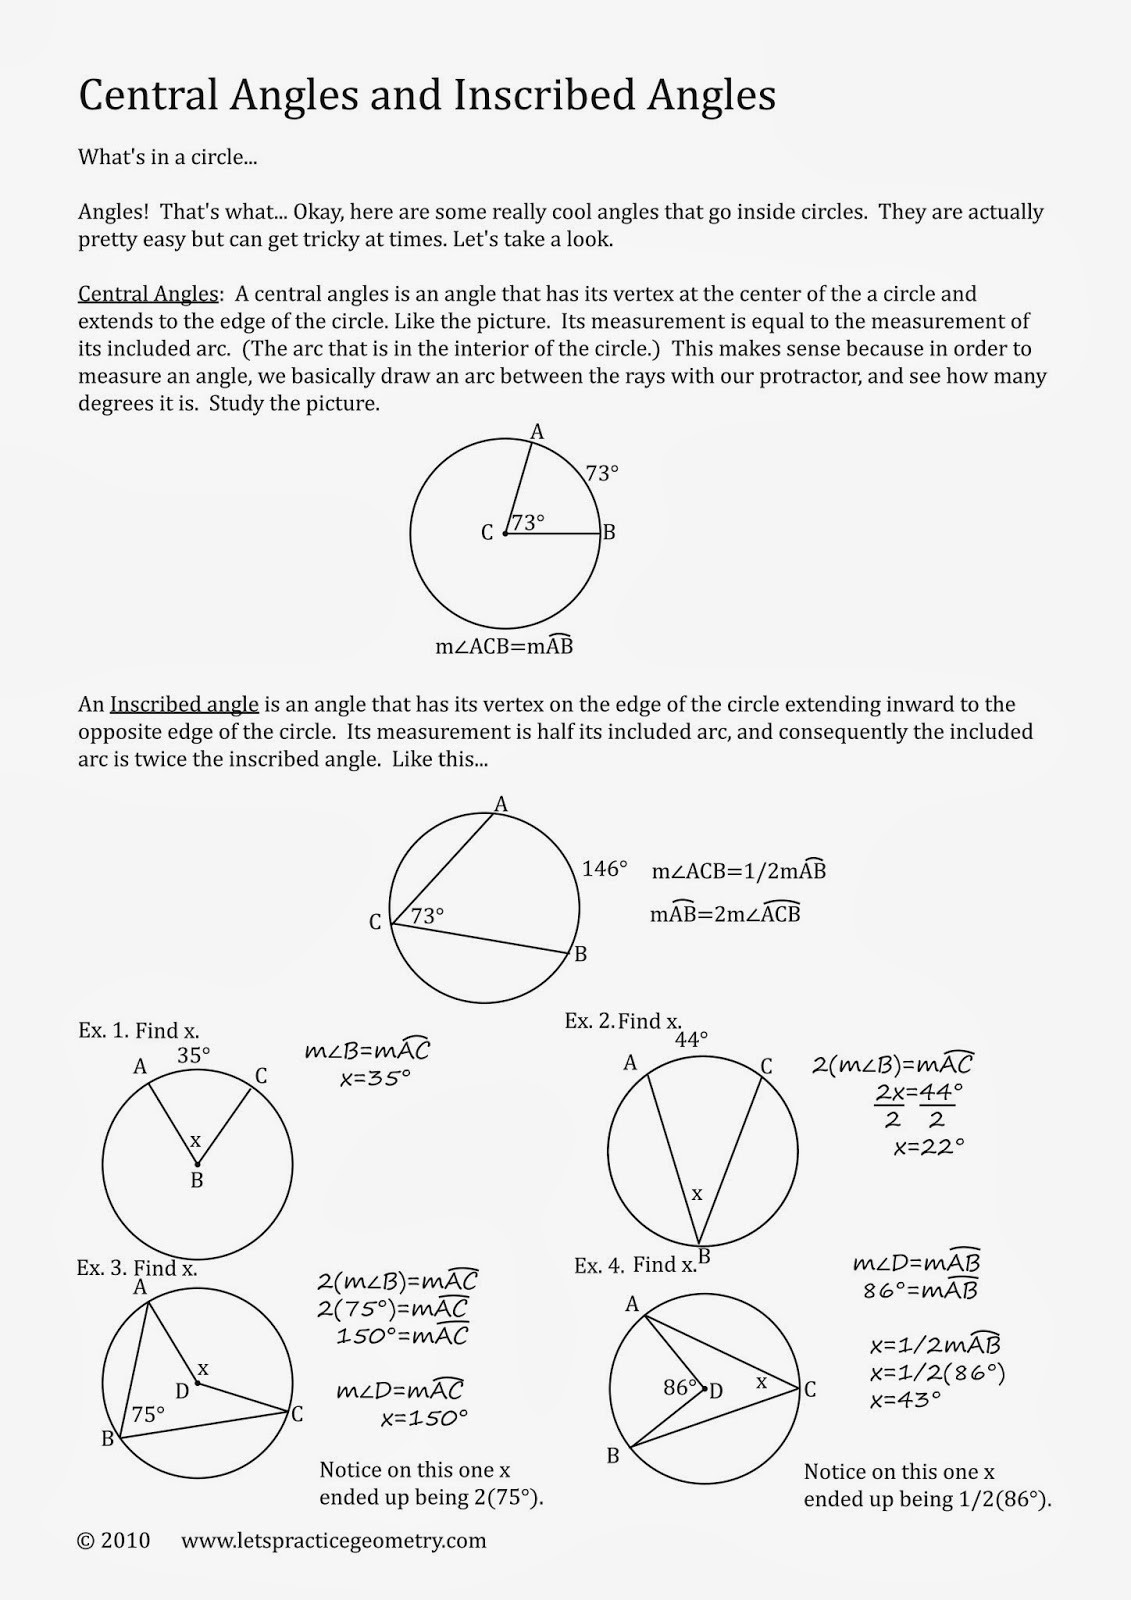 Central and Inscribed Angle Worksheet Worksheet Inscribed Angles and Arcs Day 2 Answer Key